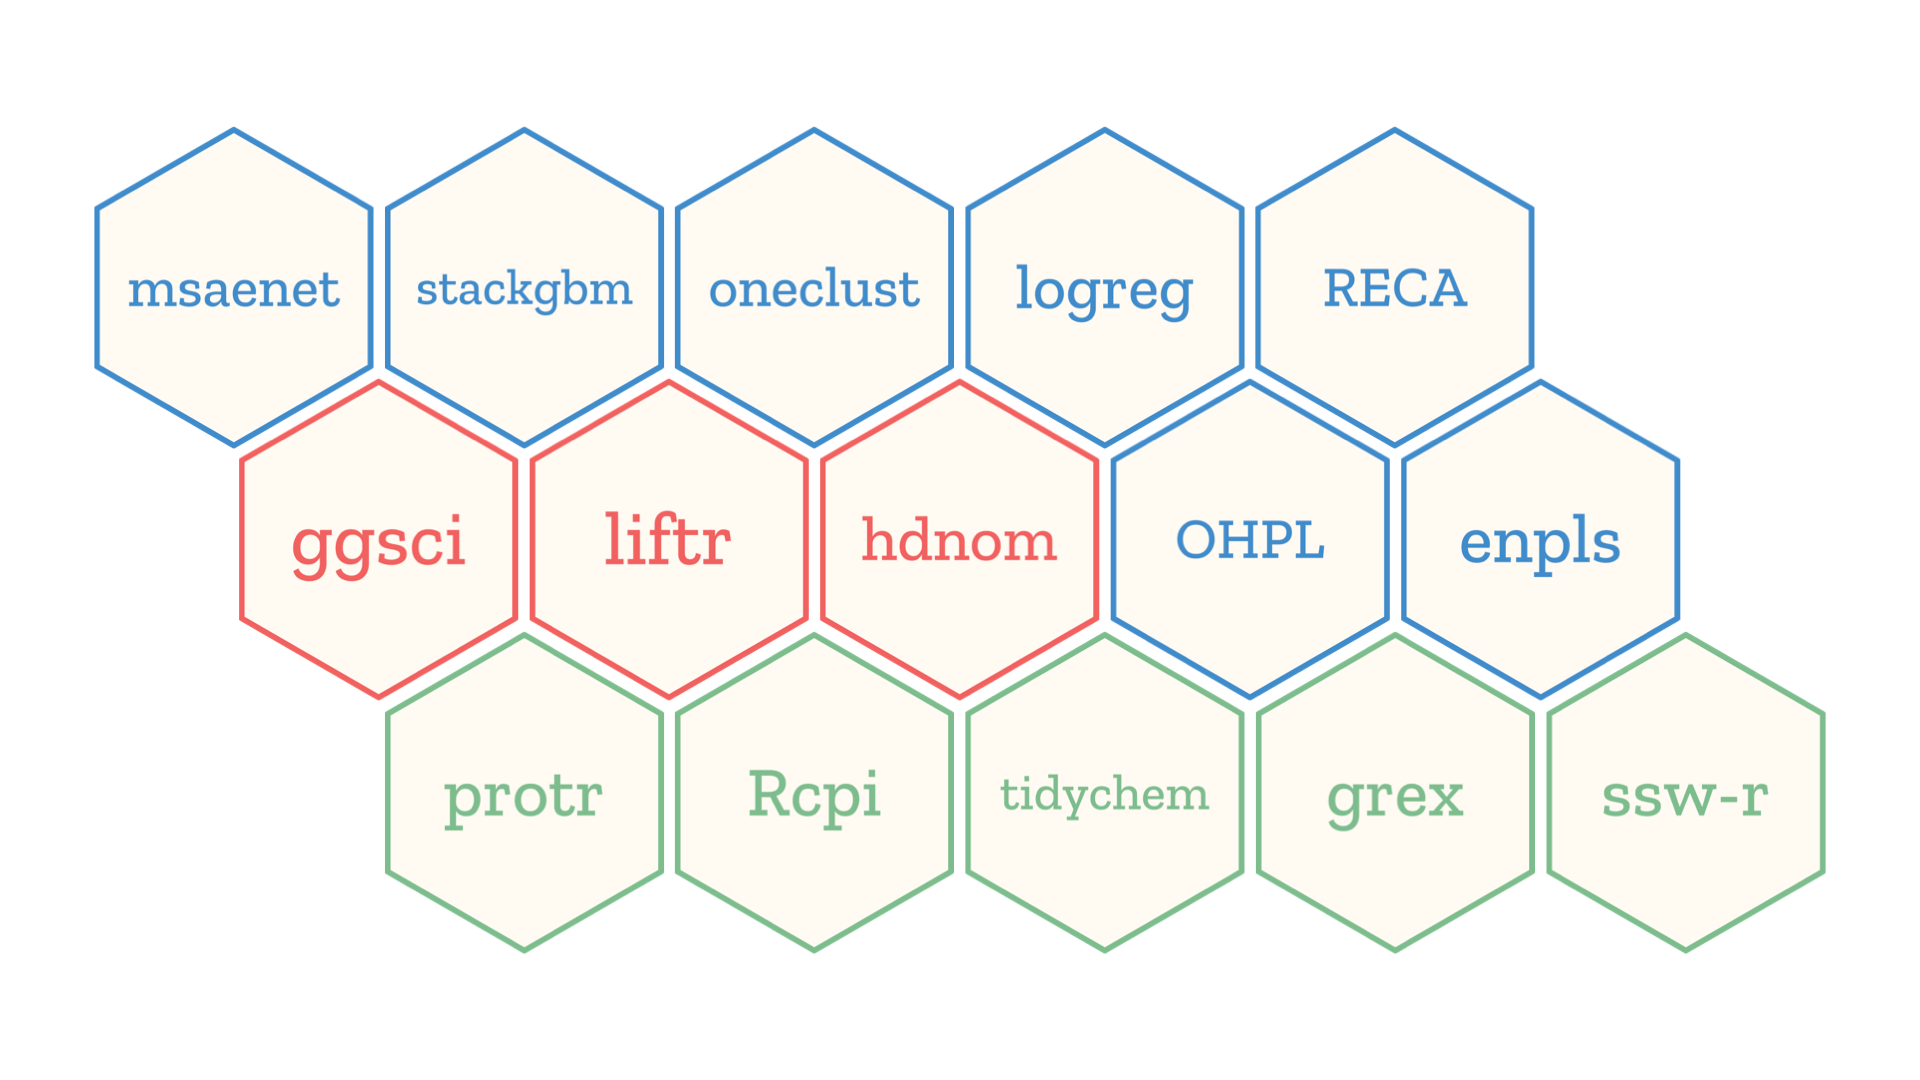 Rebranding R Packages with Hexagon Stickers: A Minimalist Approach